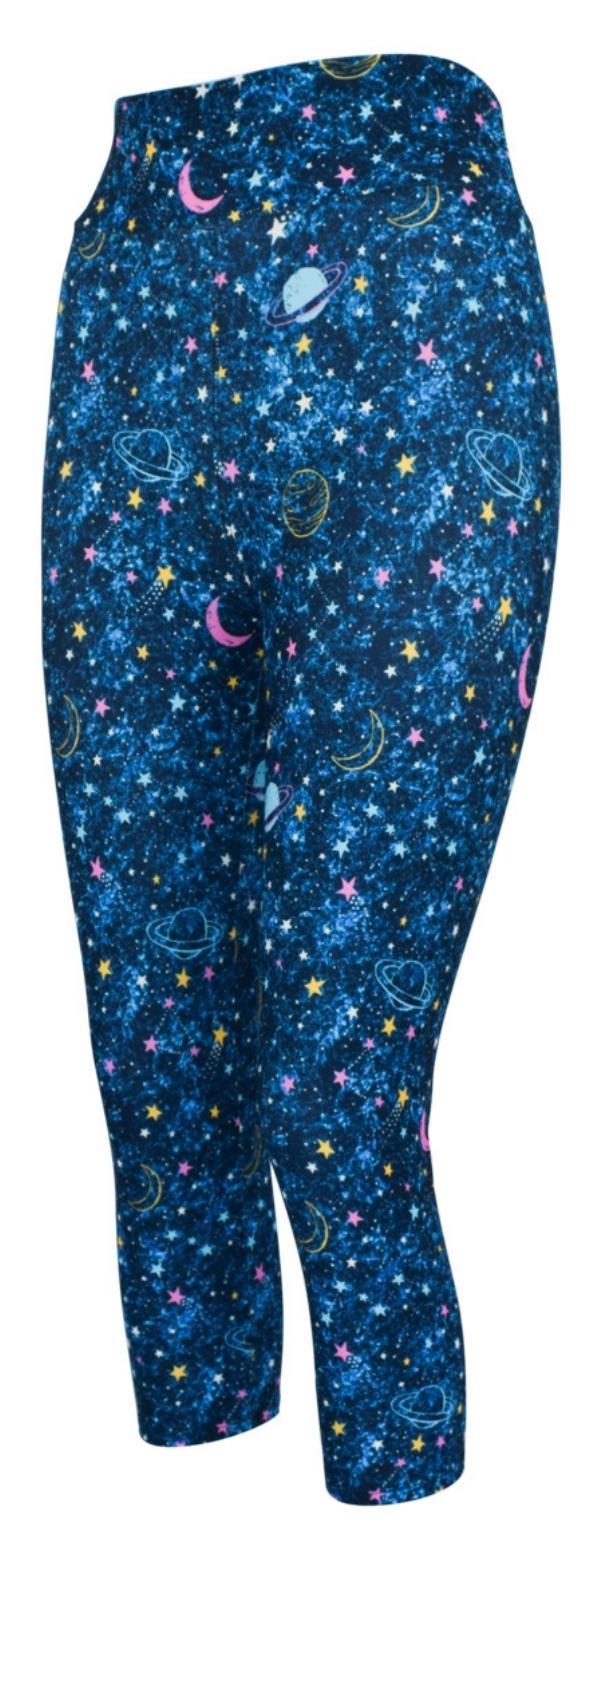 Out Of This World-Adult Leggings